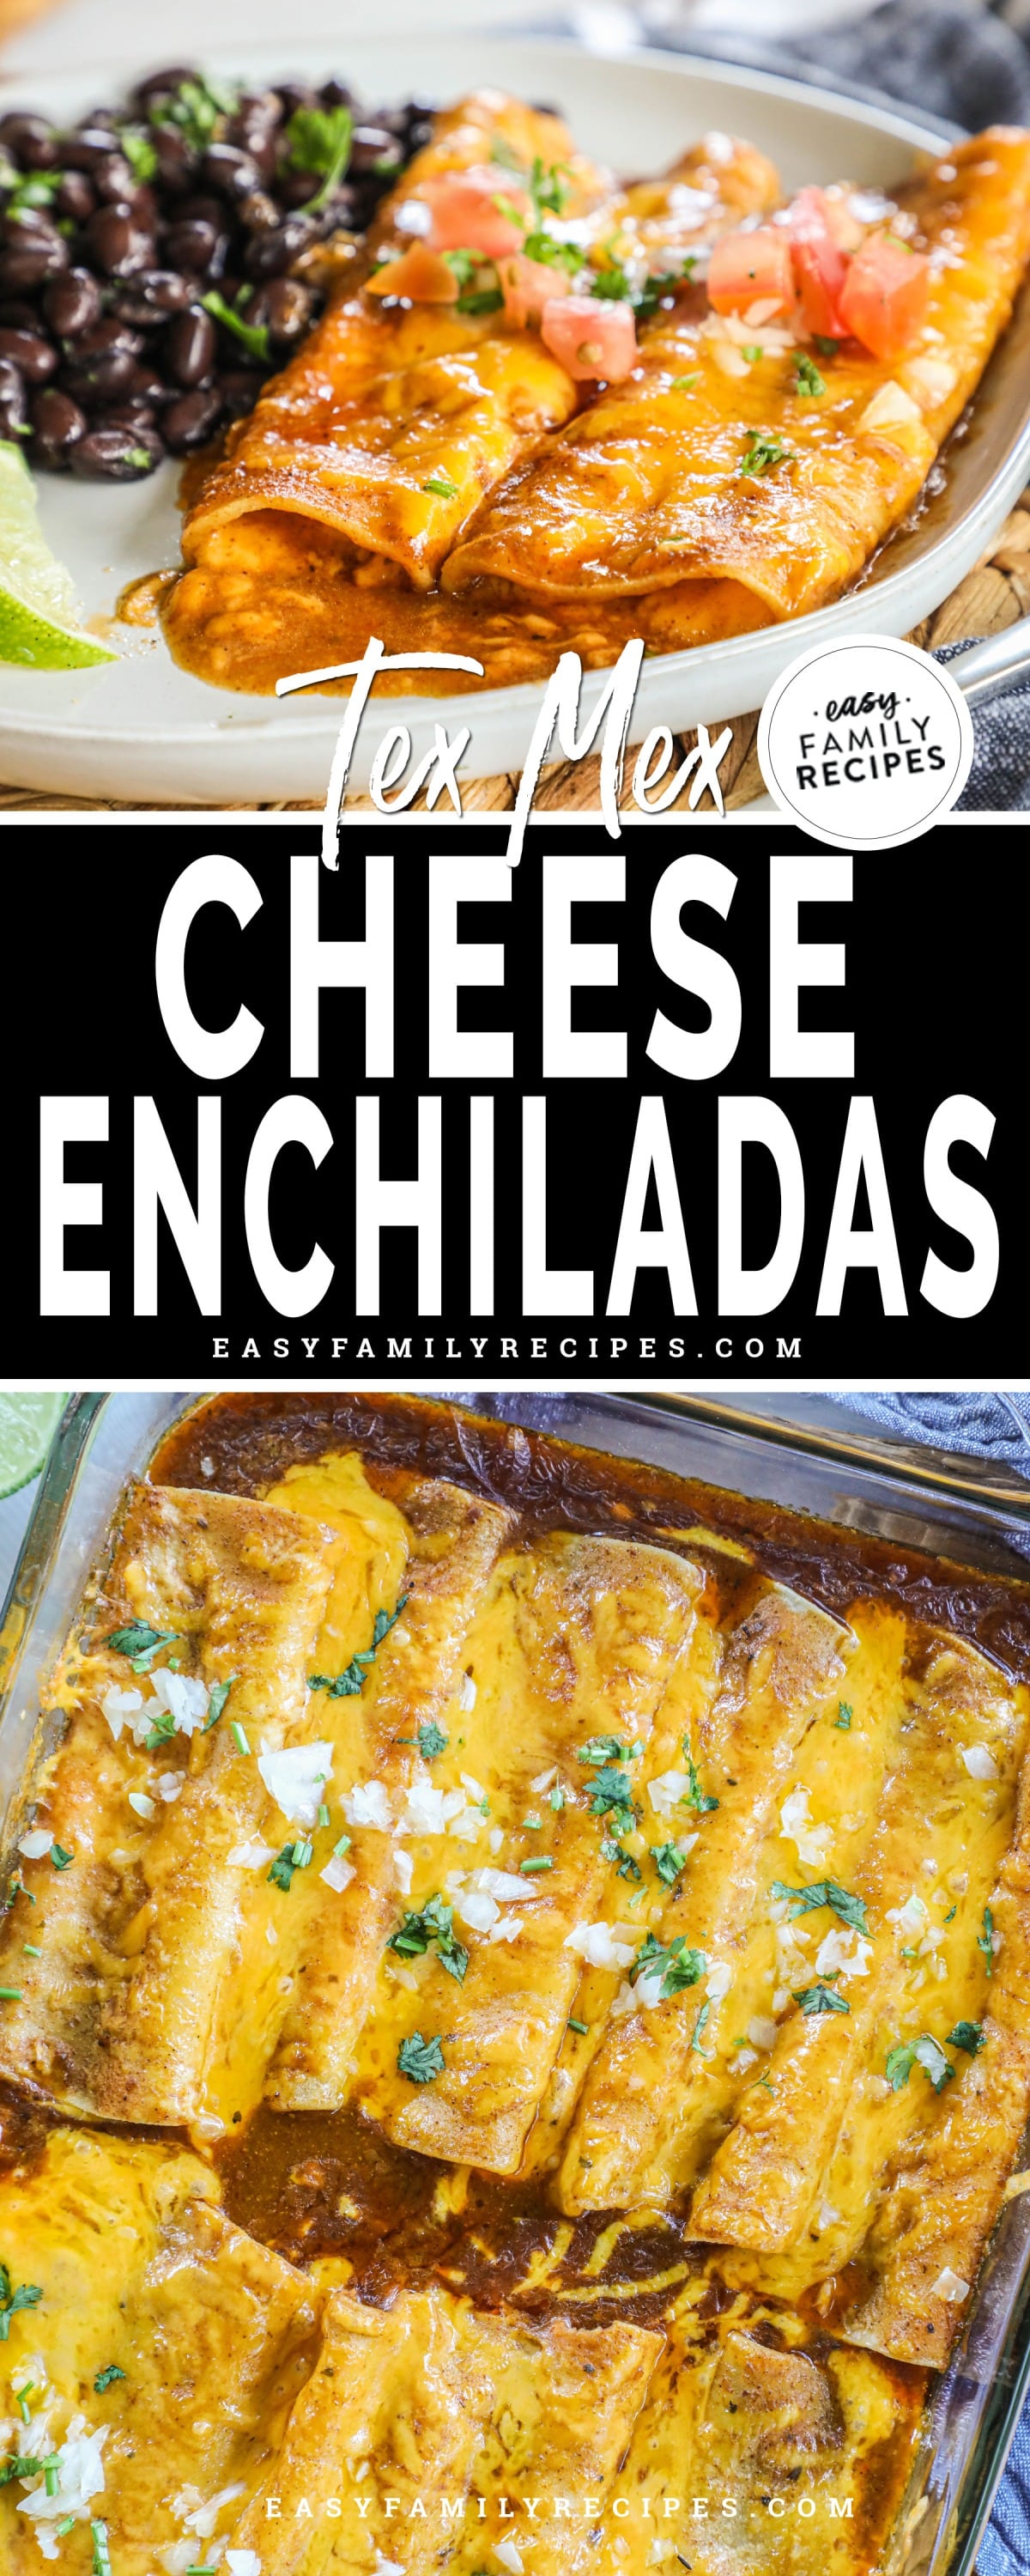 2 image stacked collage of Tex MEx cheese enchiladas on a serving plate and in the baking dish.